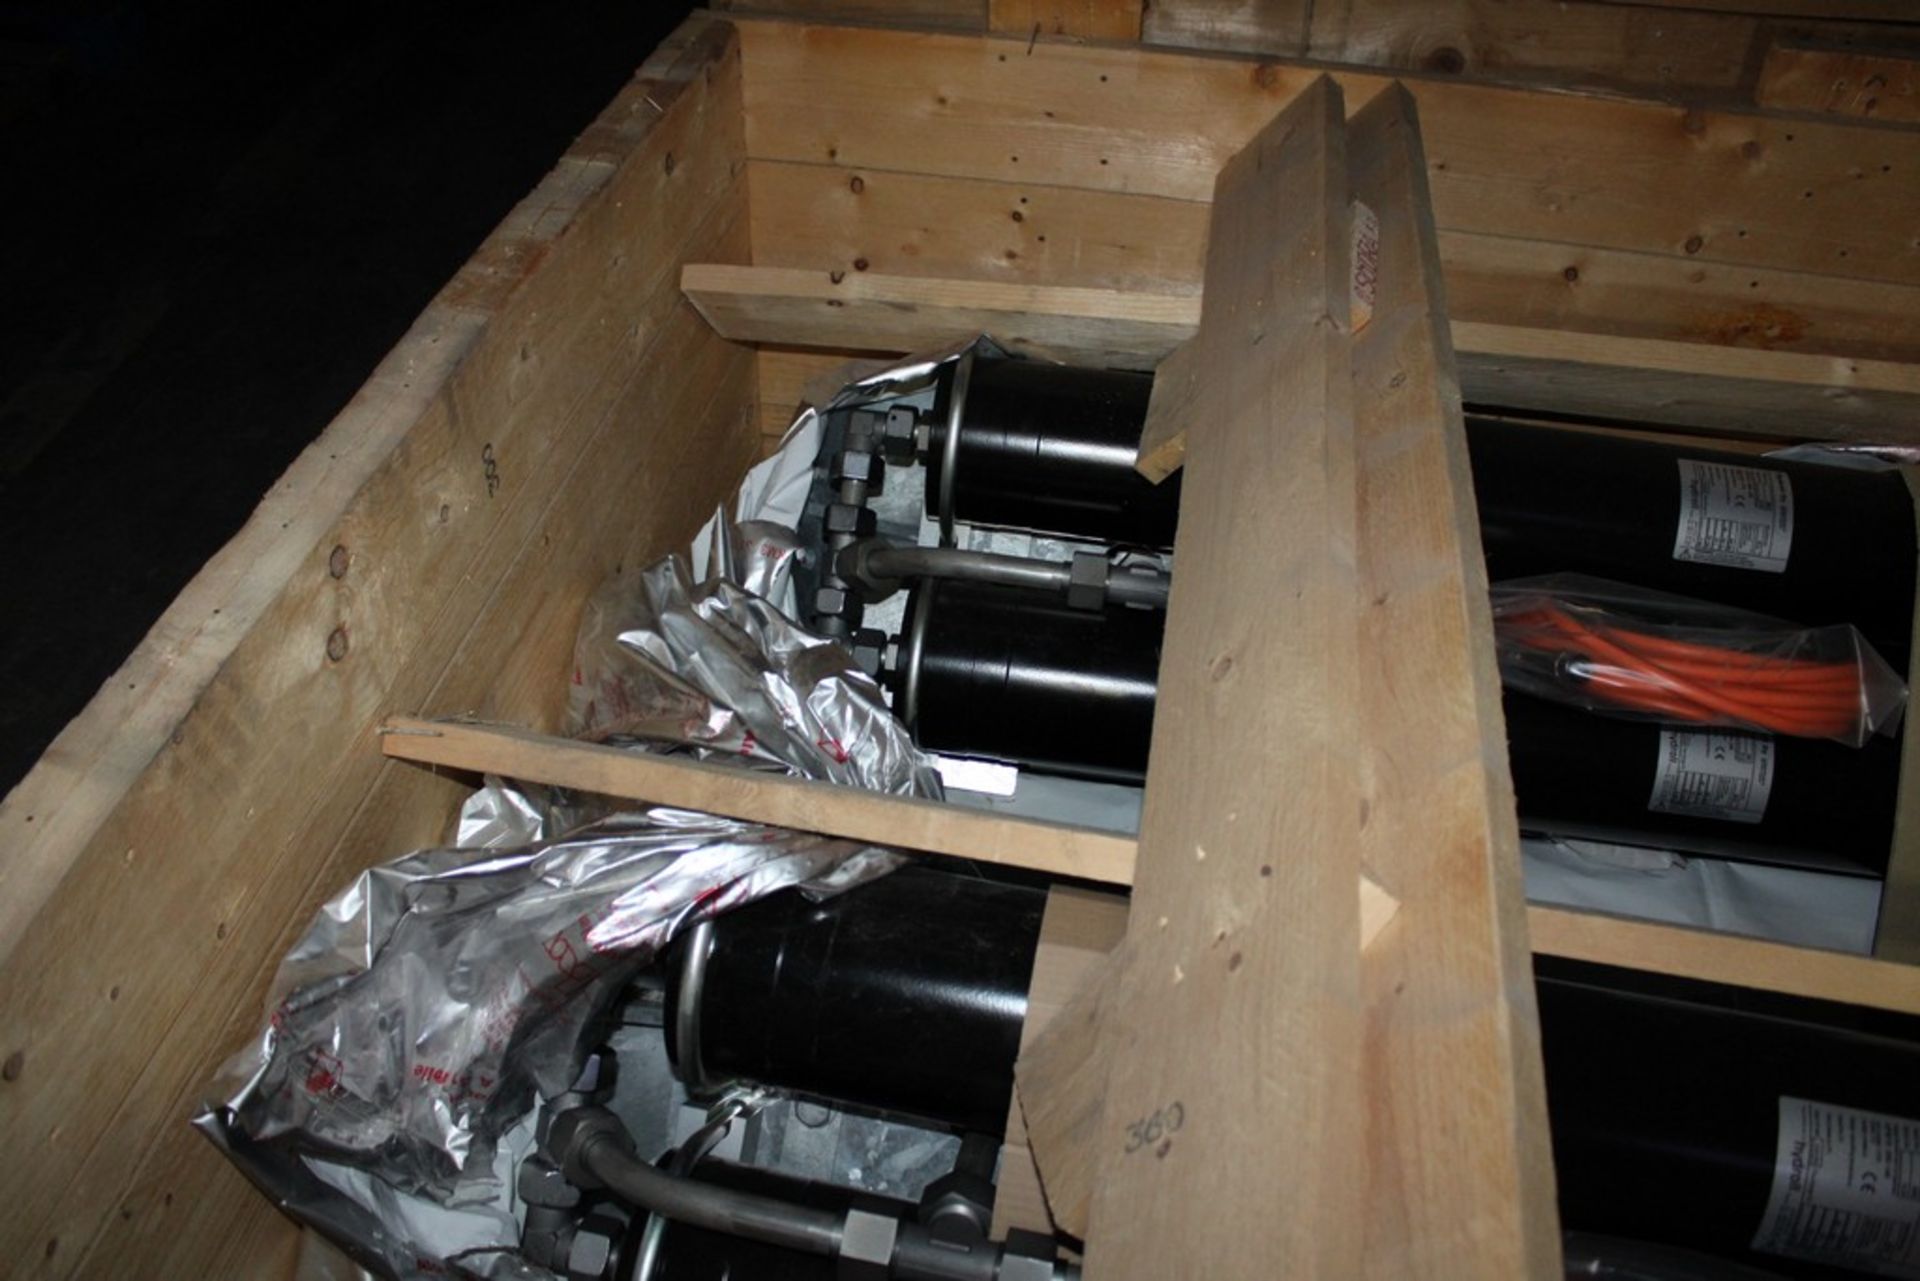 (2) HYDROLL / PMC SC 113738 0A PITCH AXIS CONTROLS / DEWIND D9.2 IN CRATE - Image 5 of 6